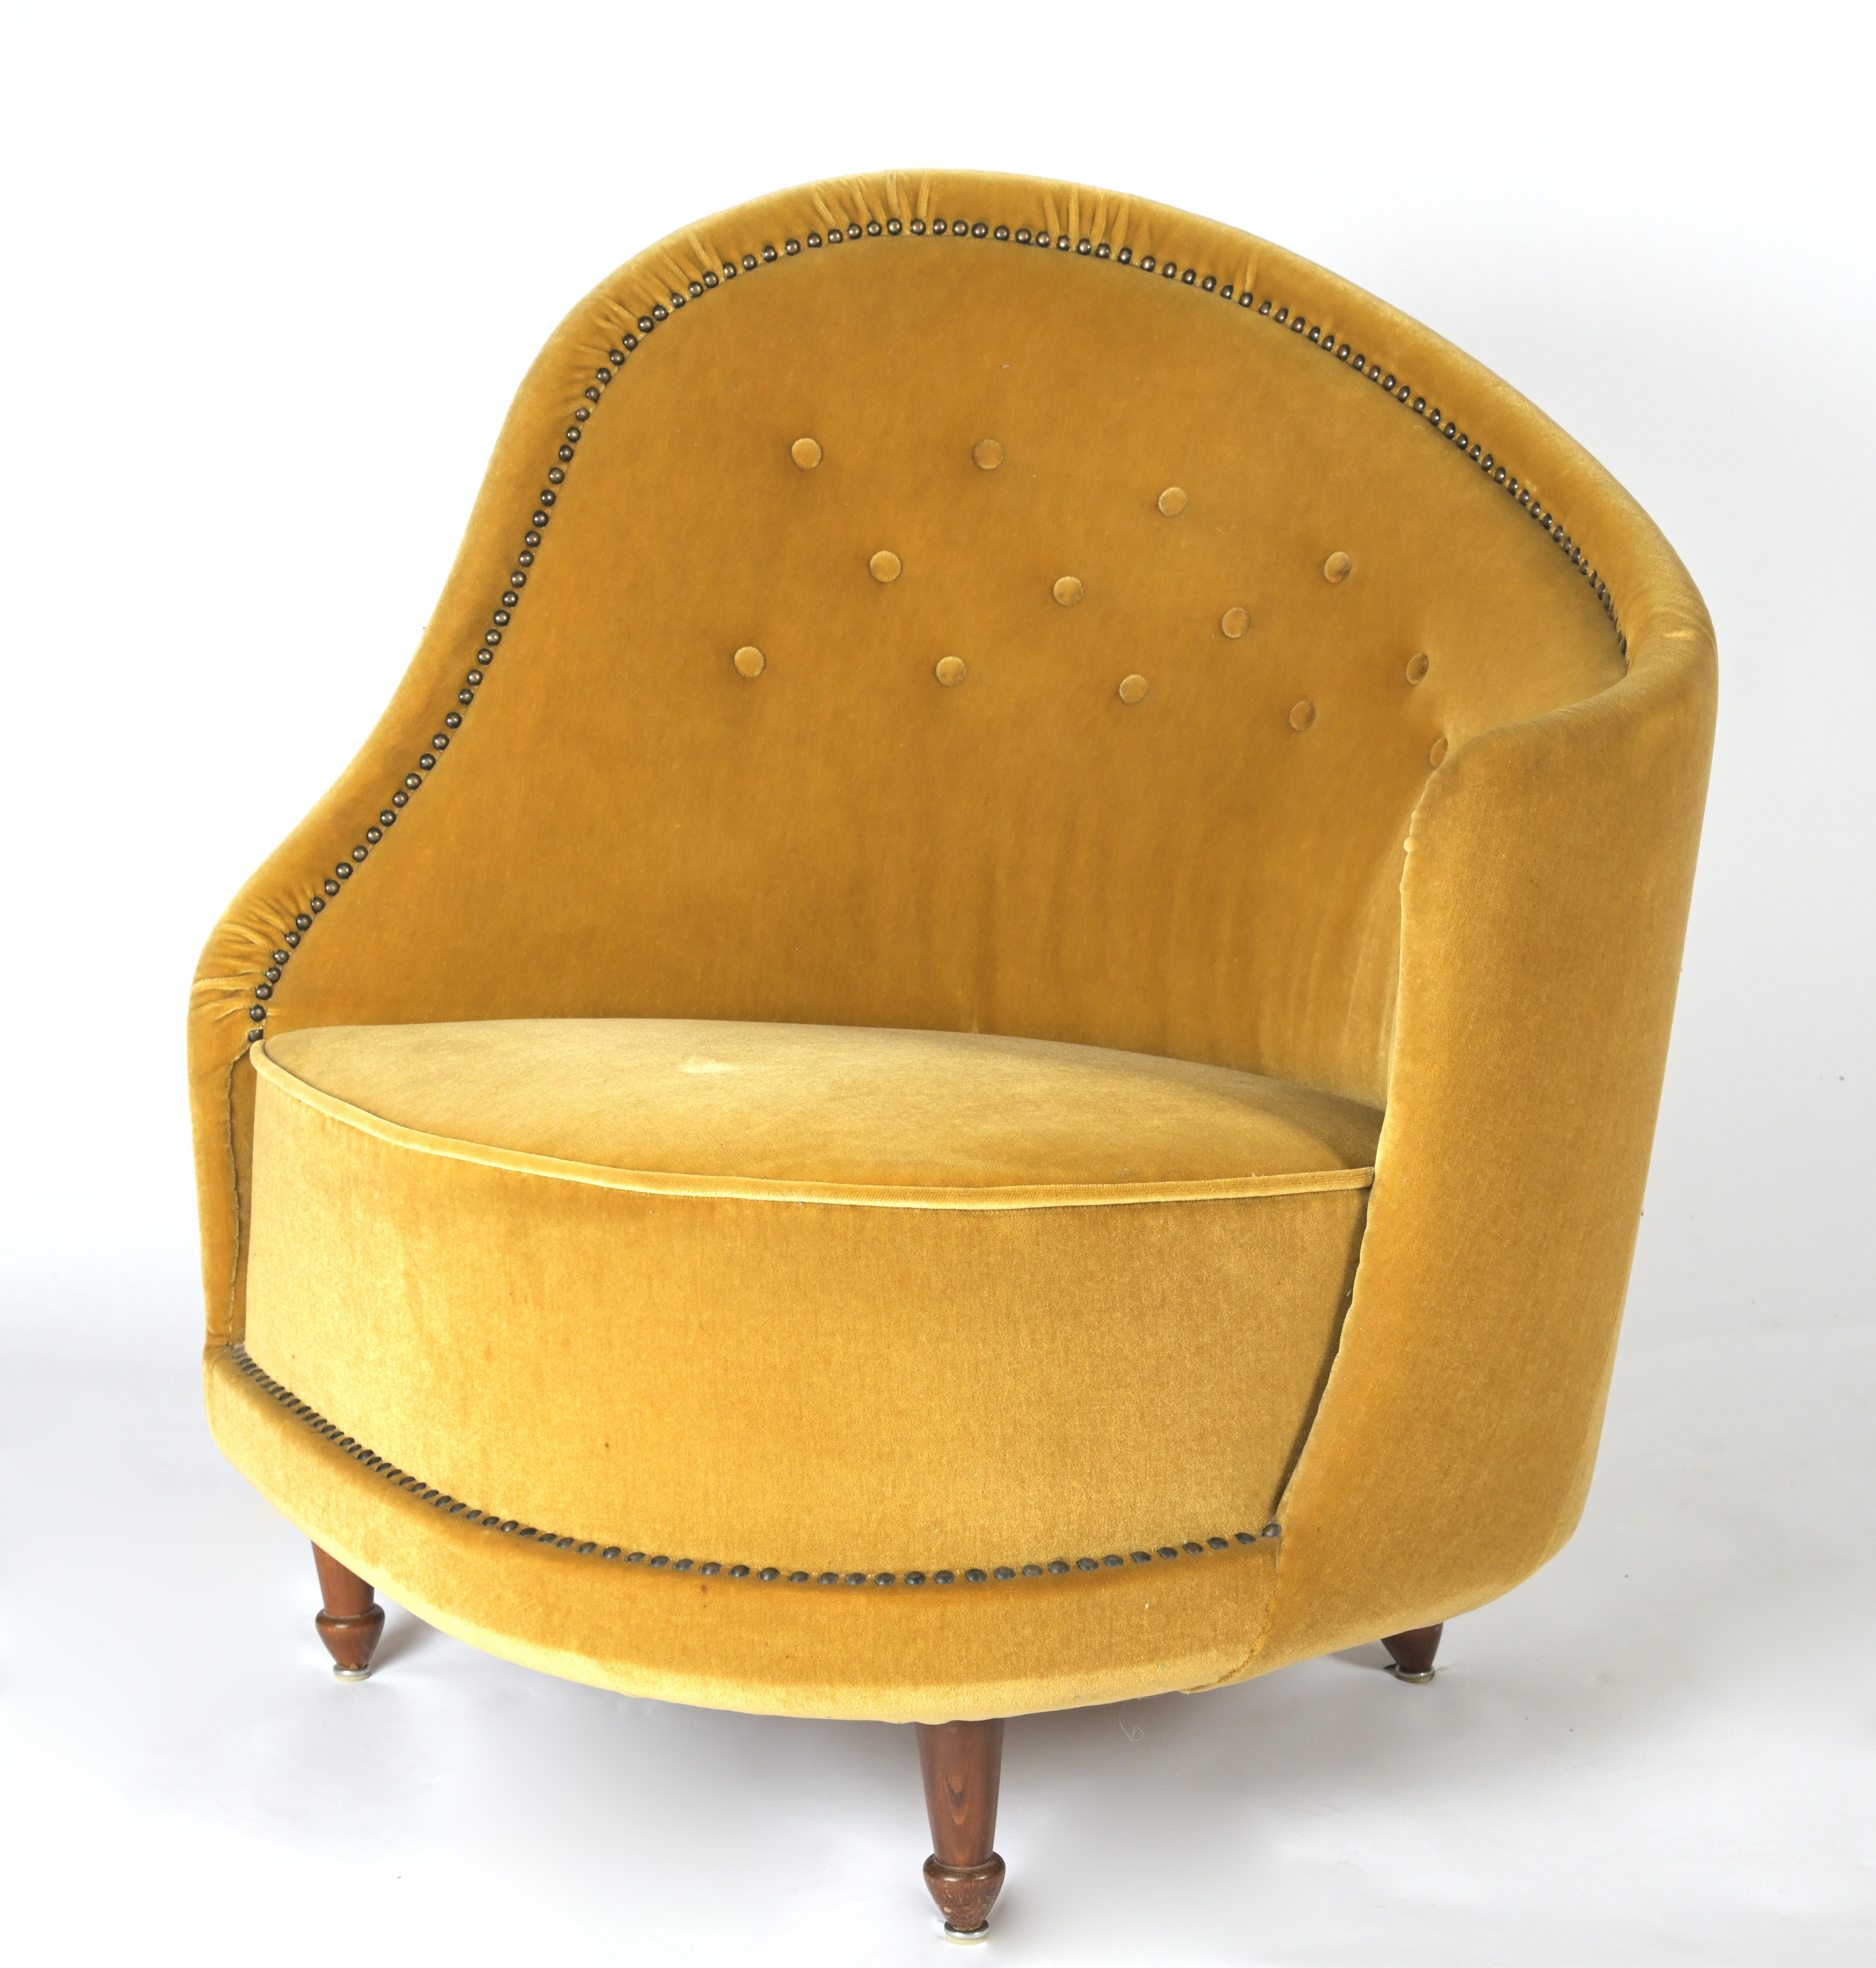 A curved armchair by Swedish Designer Carl Cederholm (1909-) having fabric buttons and tapered teak legs, circa 1940s.